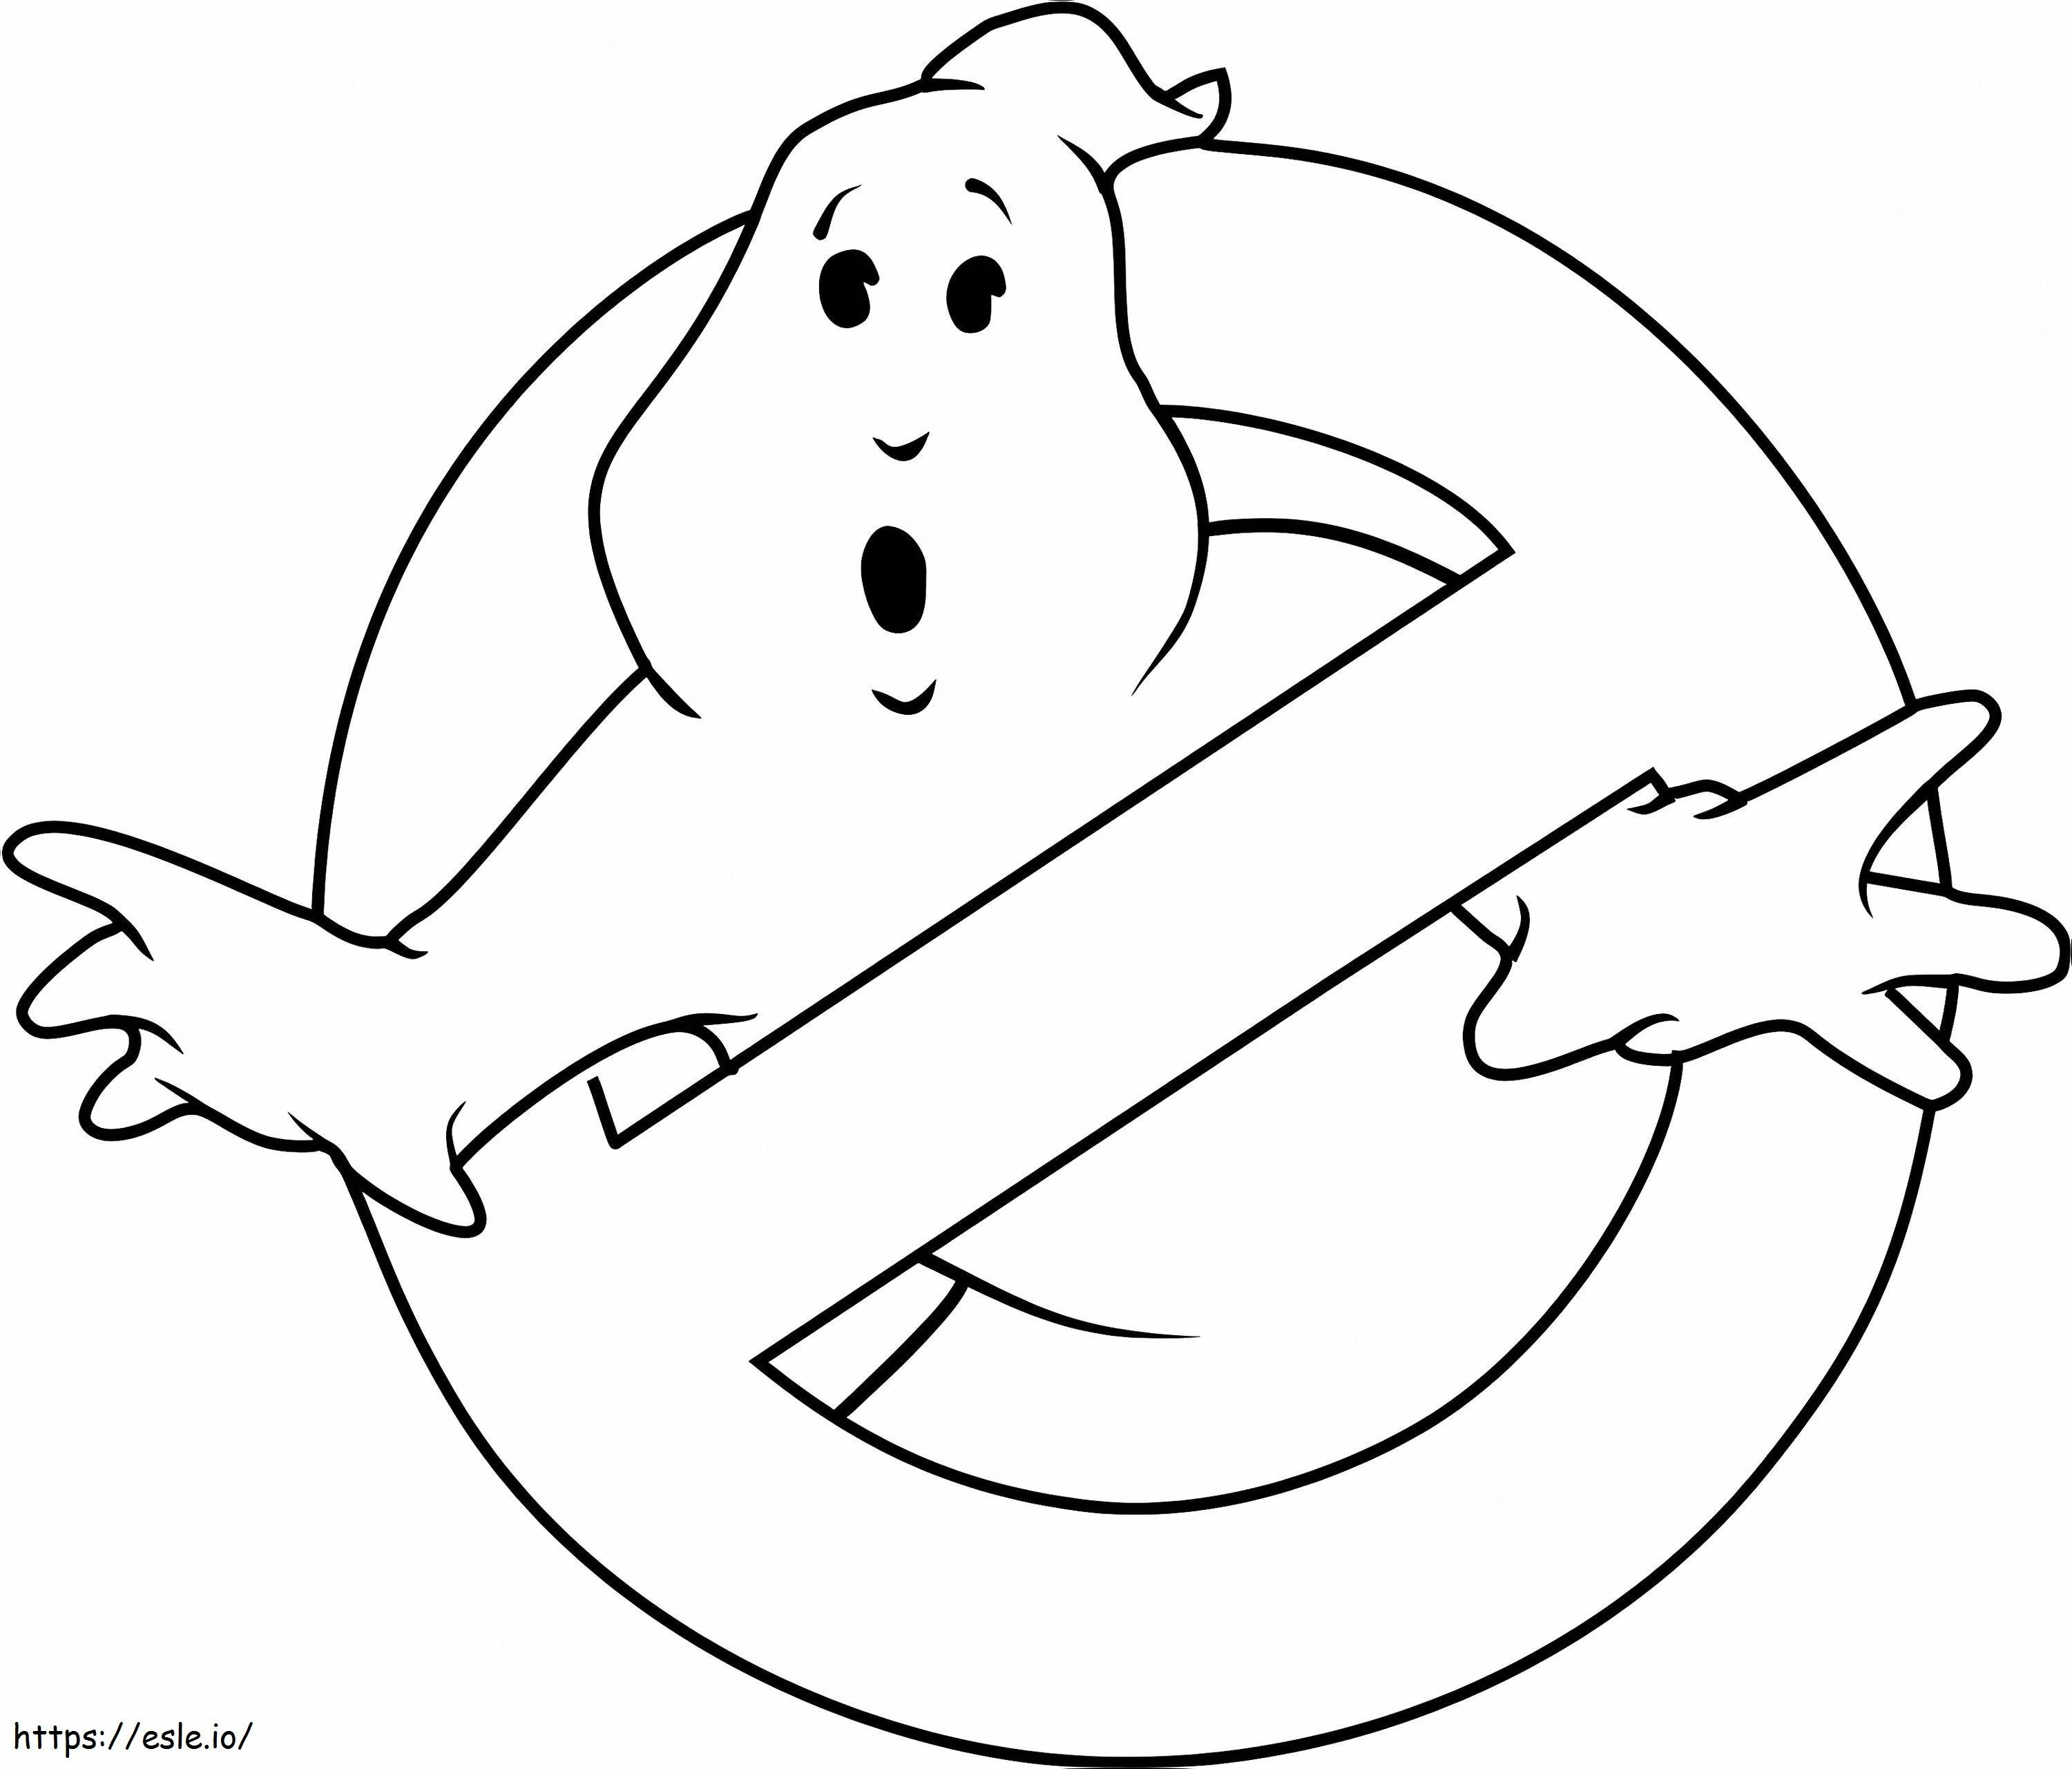 1532145428 Logo Of Ghostbusters A4 coloring page